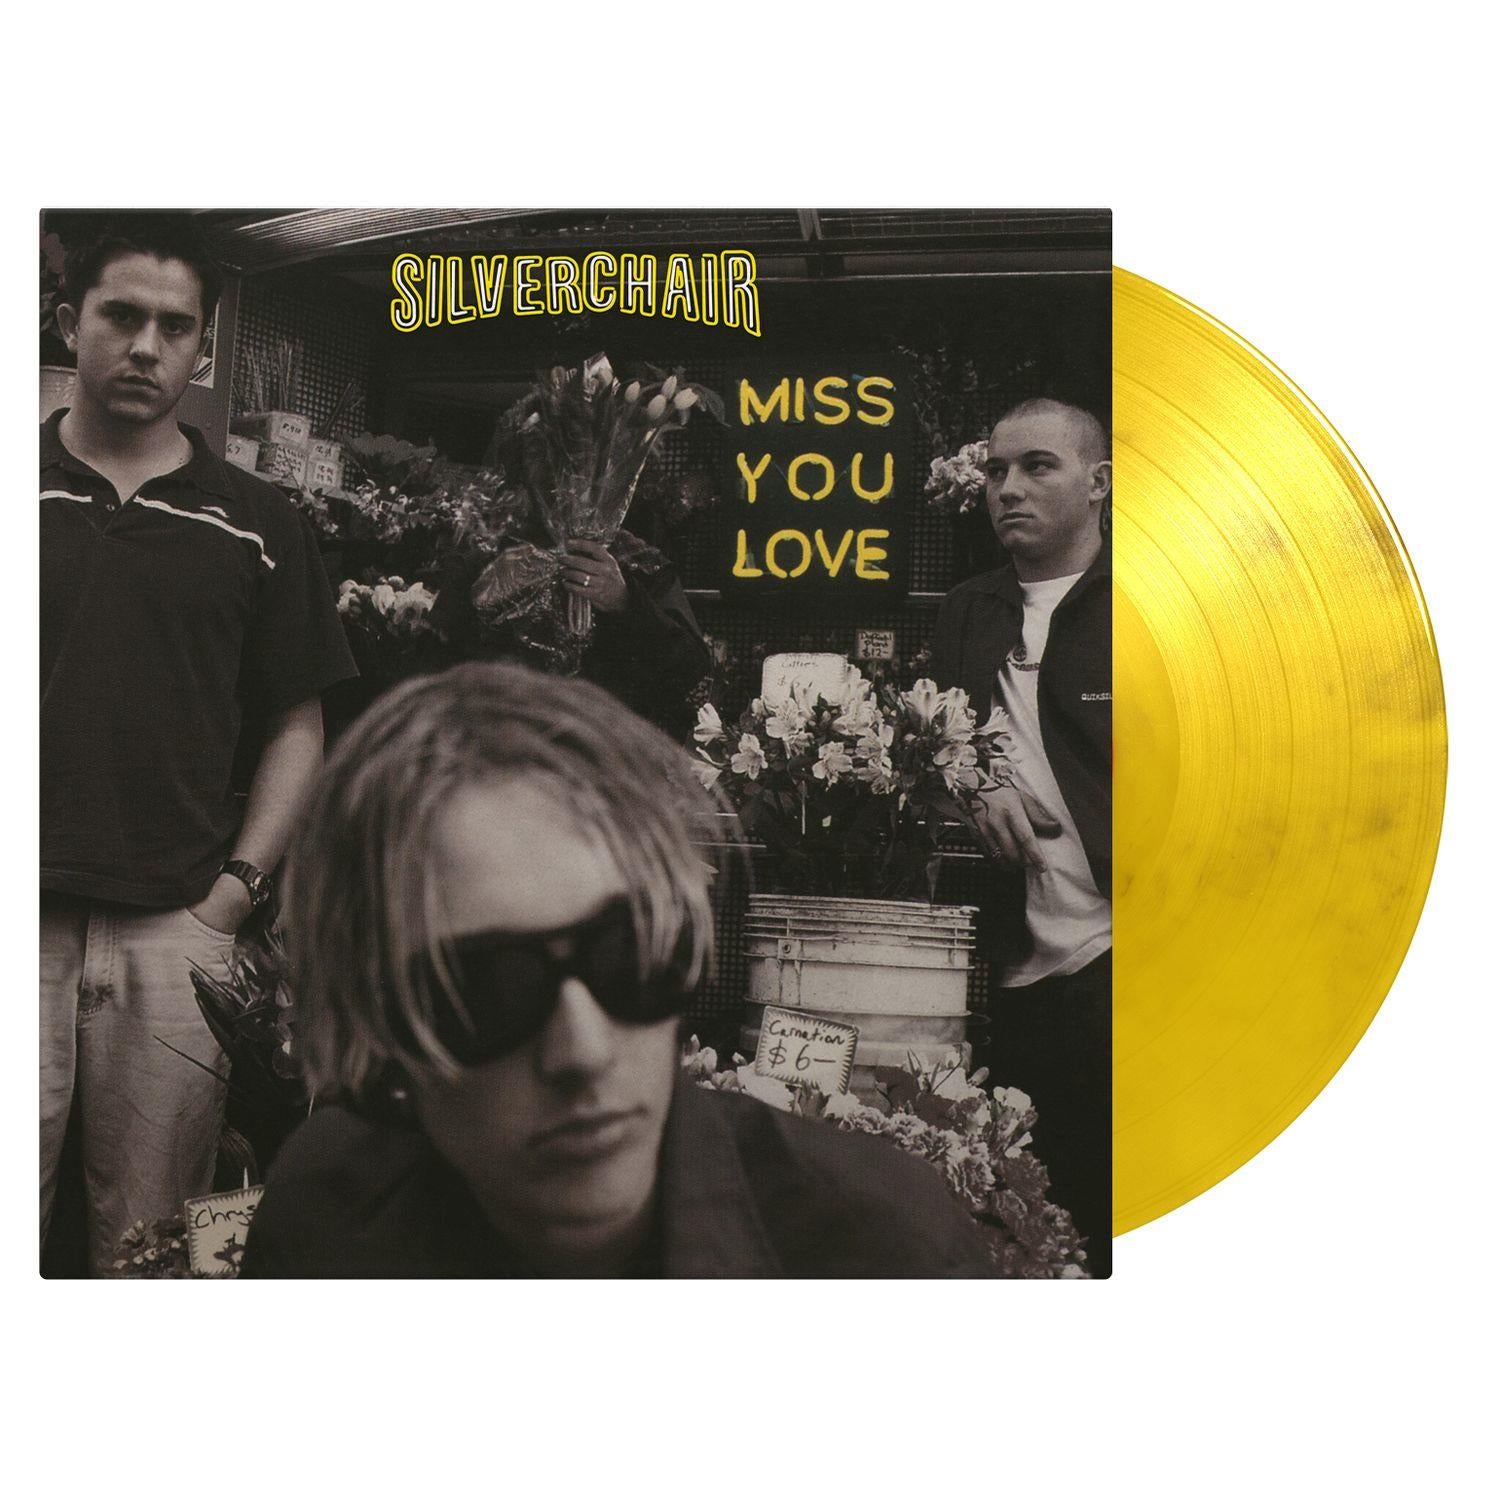 miss you love (12in crystal clear, yellow & black marbled vinyl)